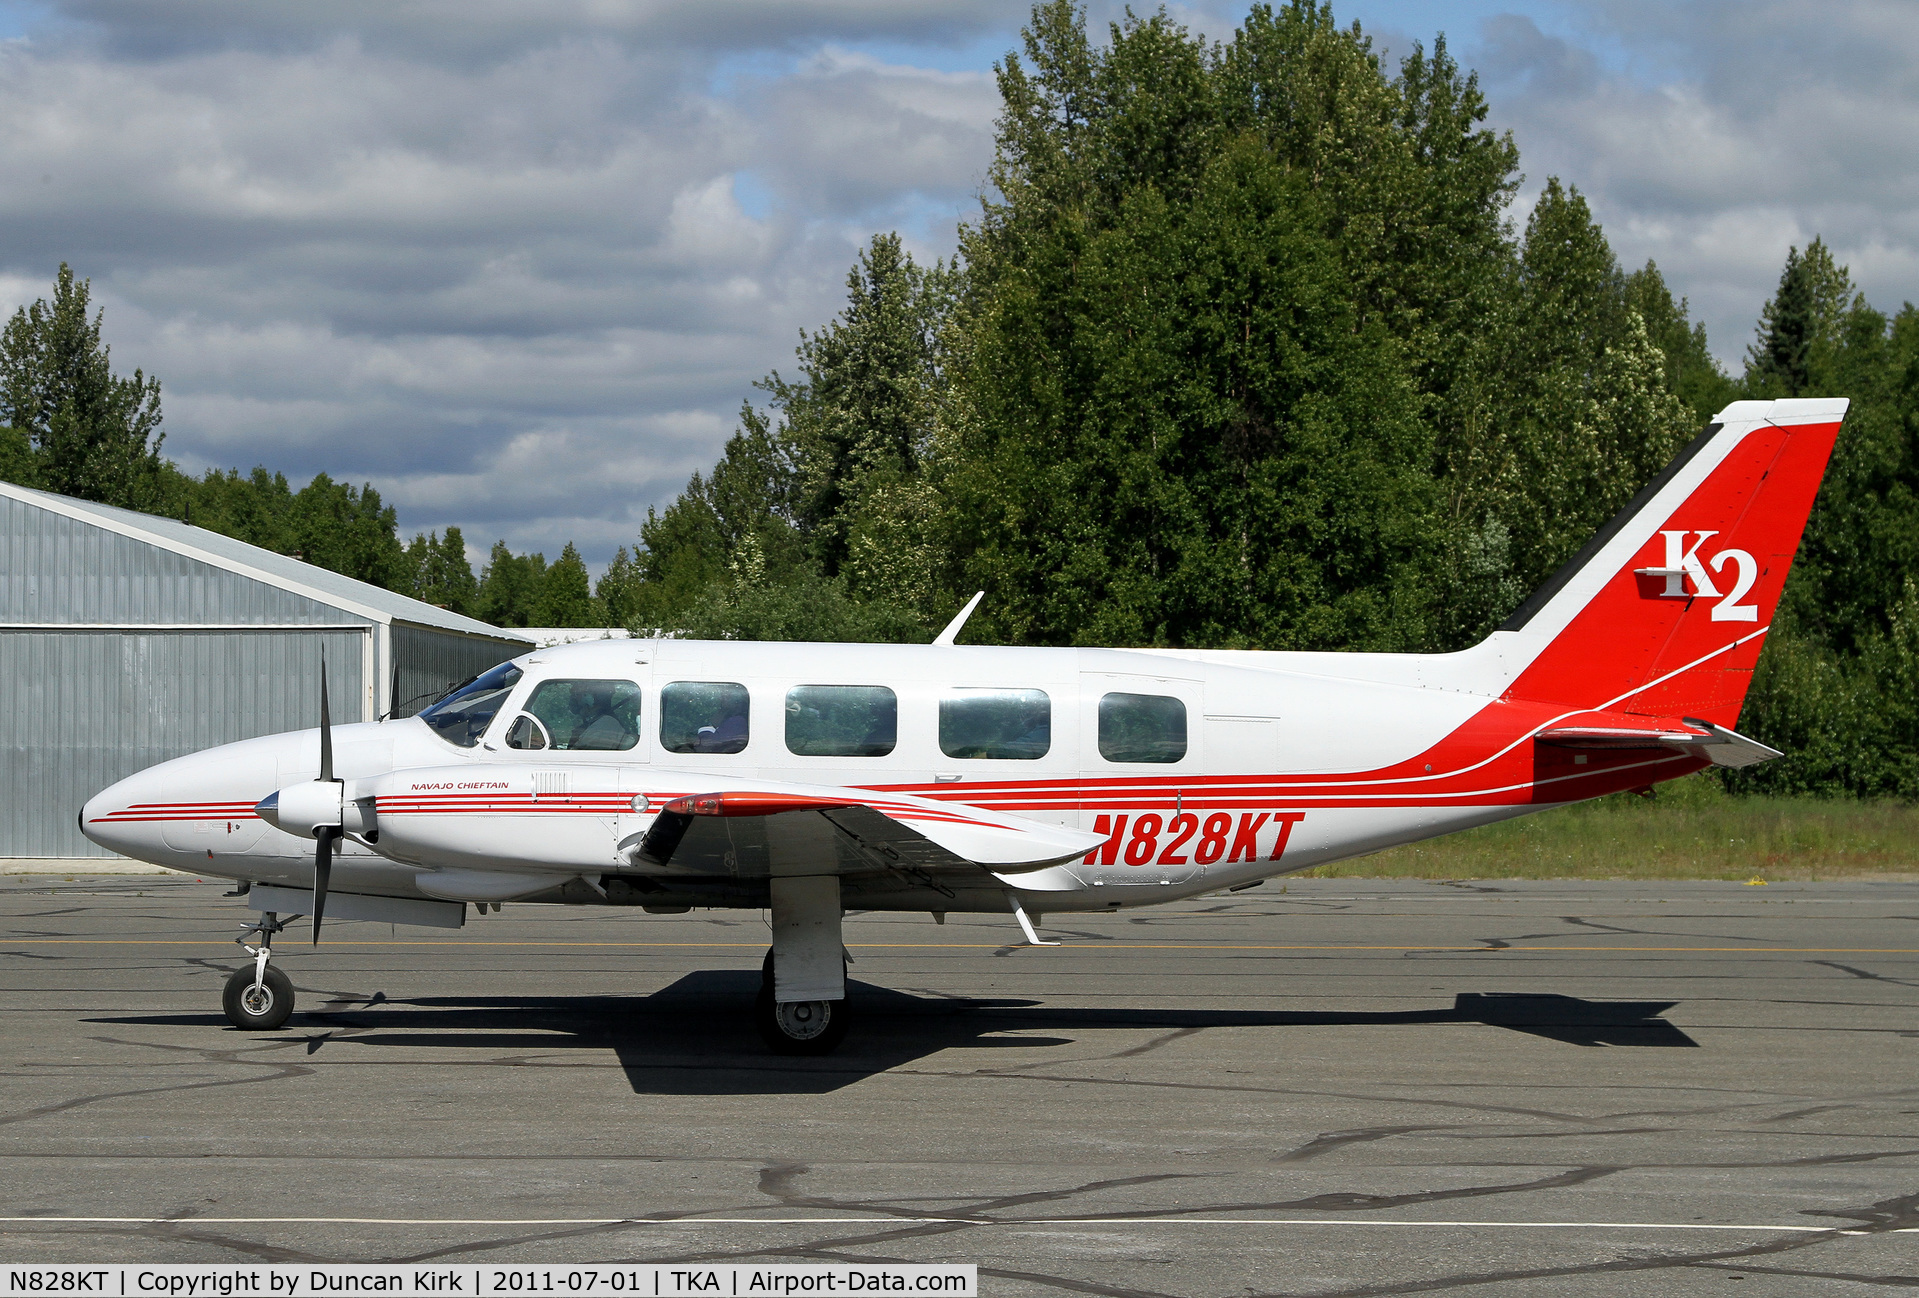 N828KT, 1980 Piper PA-31-350 Chieftain C/N 318052098, K2 is extremely busy with sightseeing in the summer